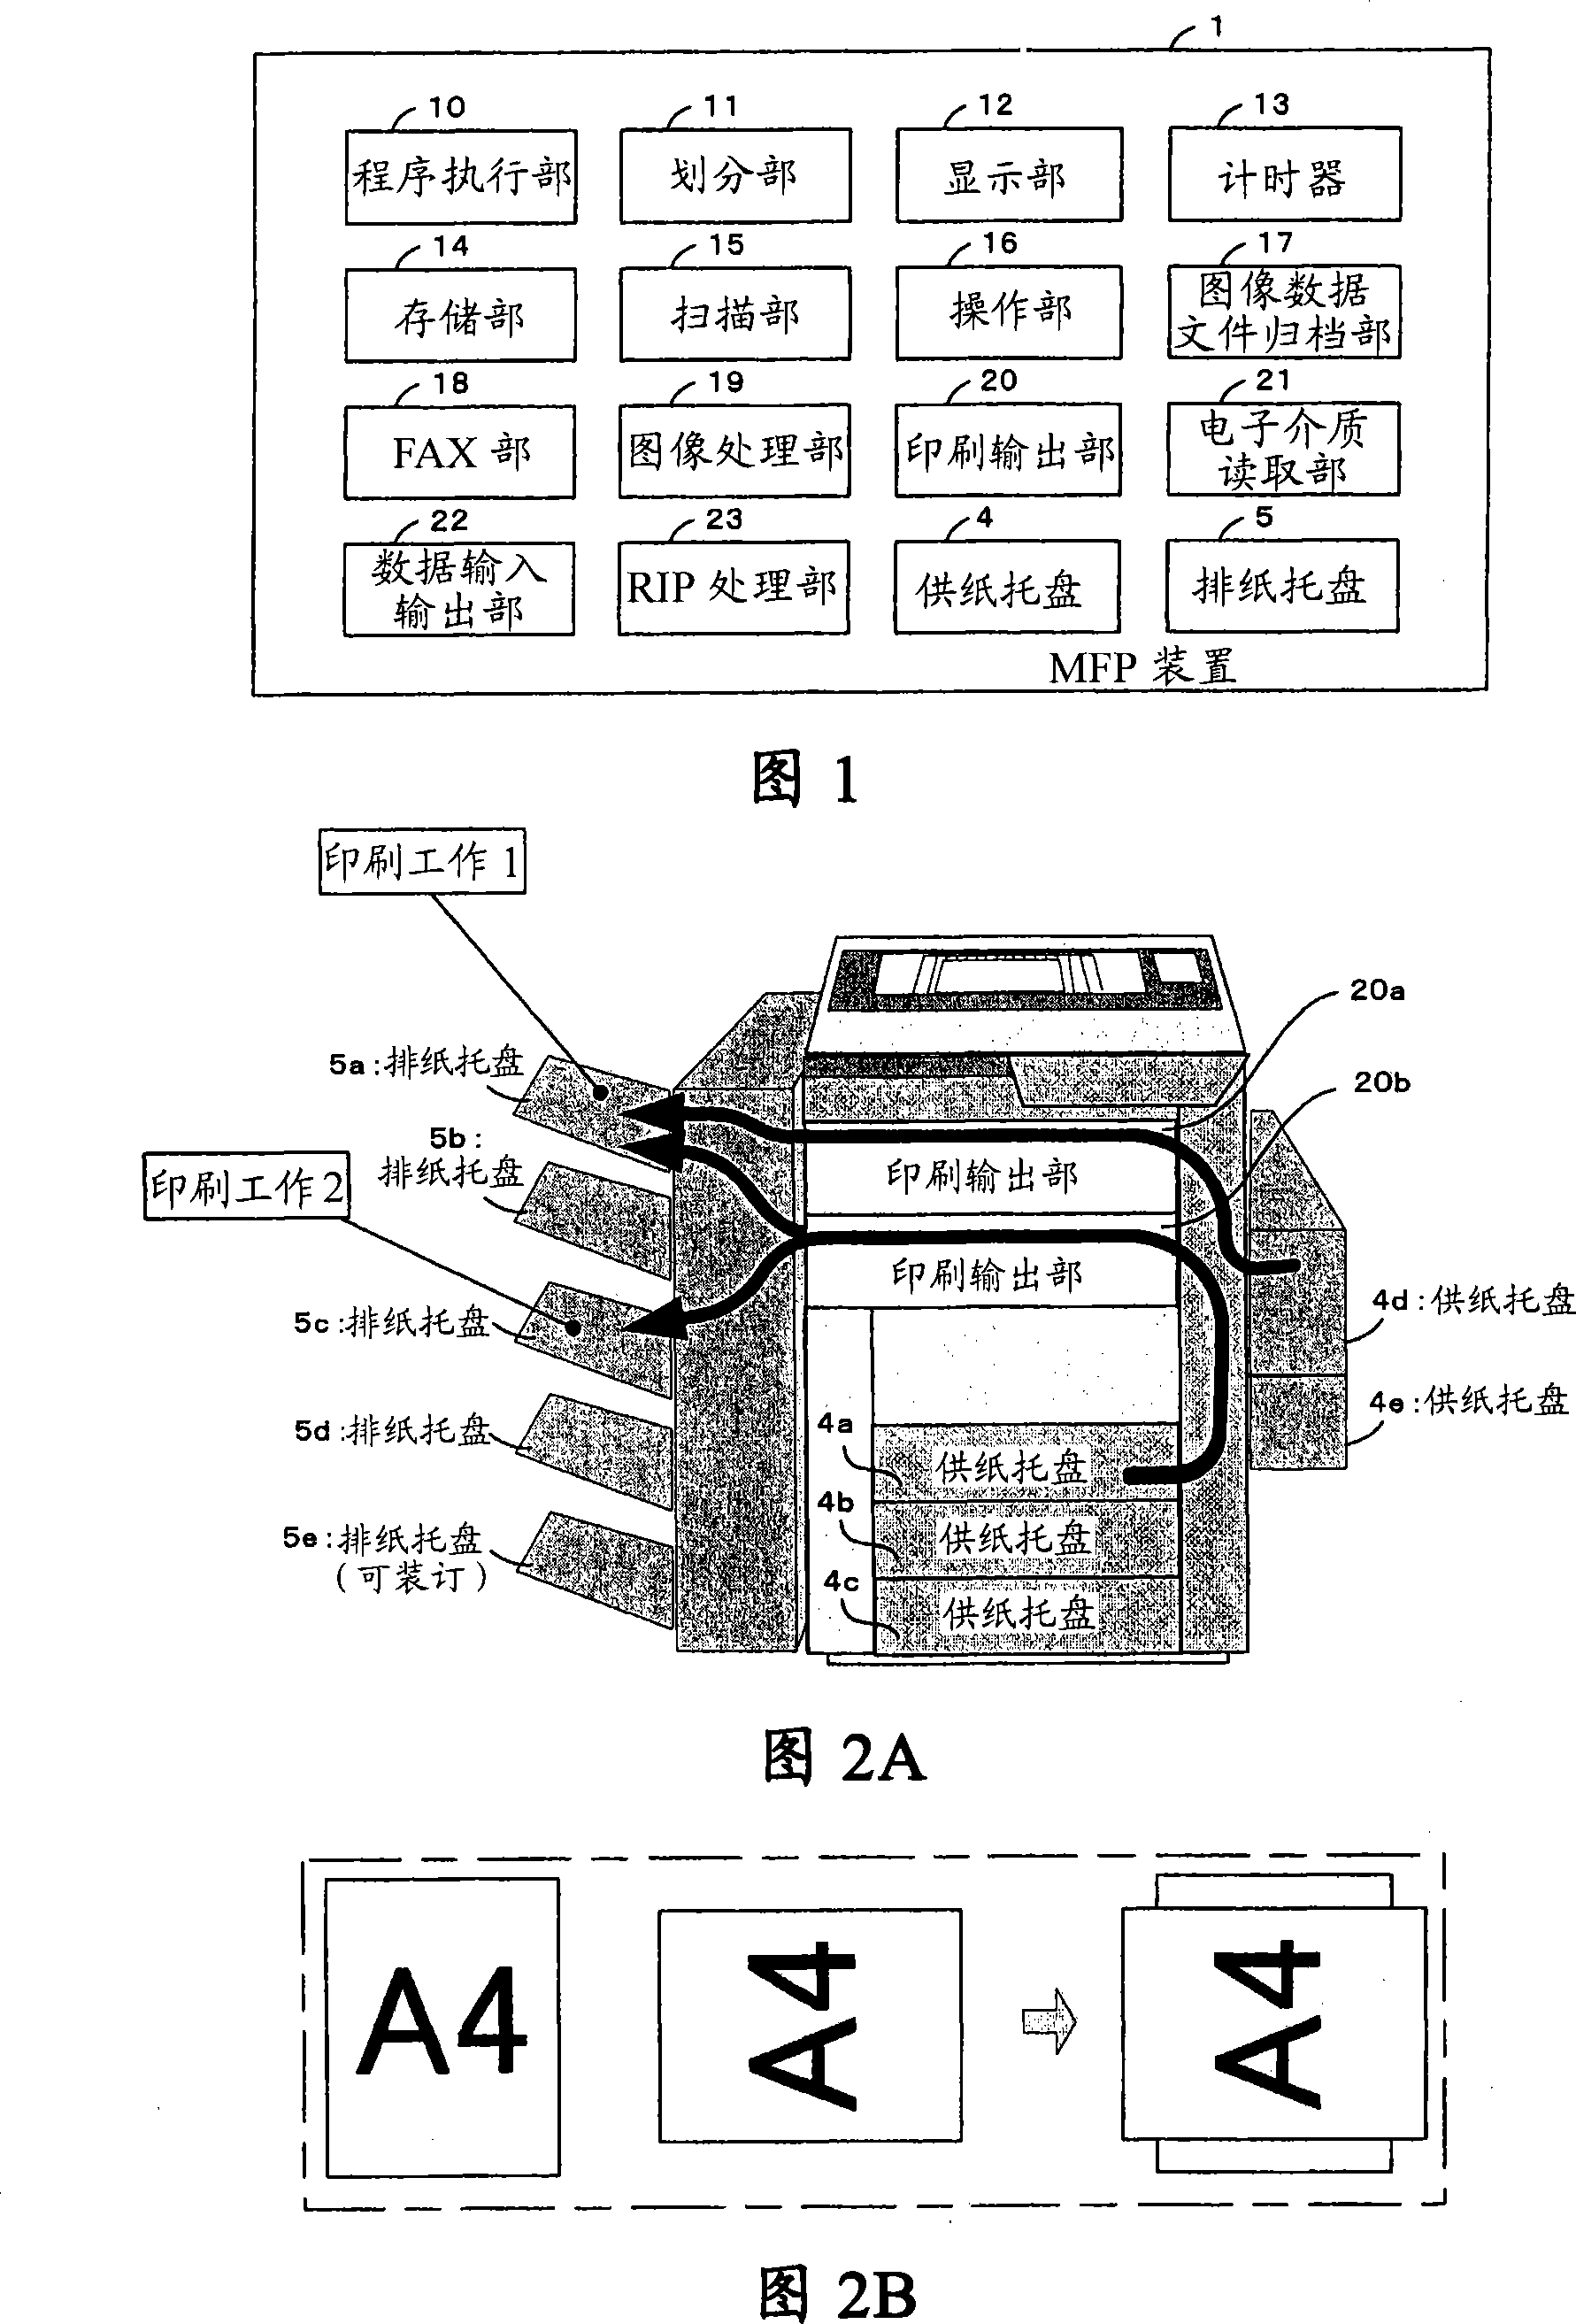 Multi function peripheral apparatus and printing method for the same